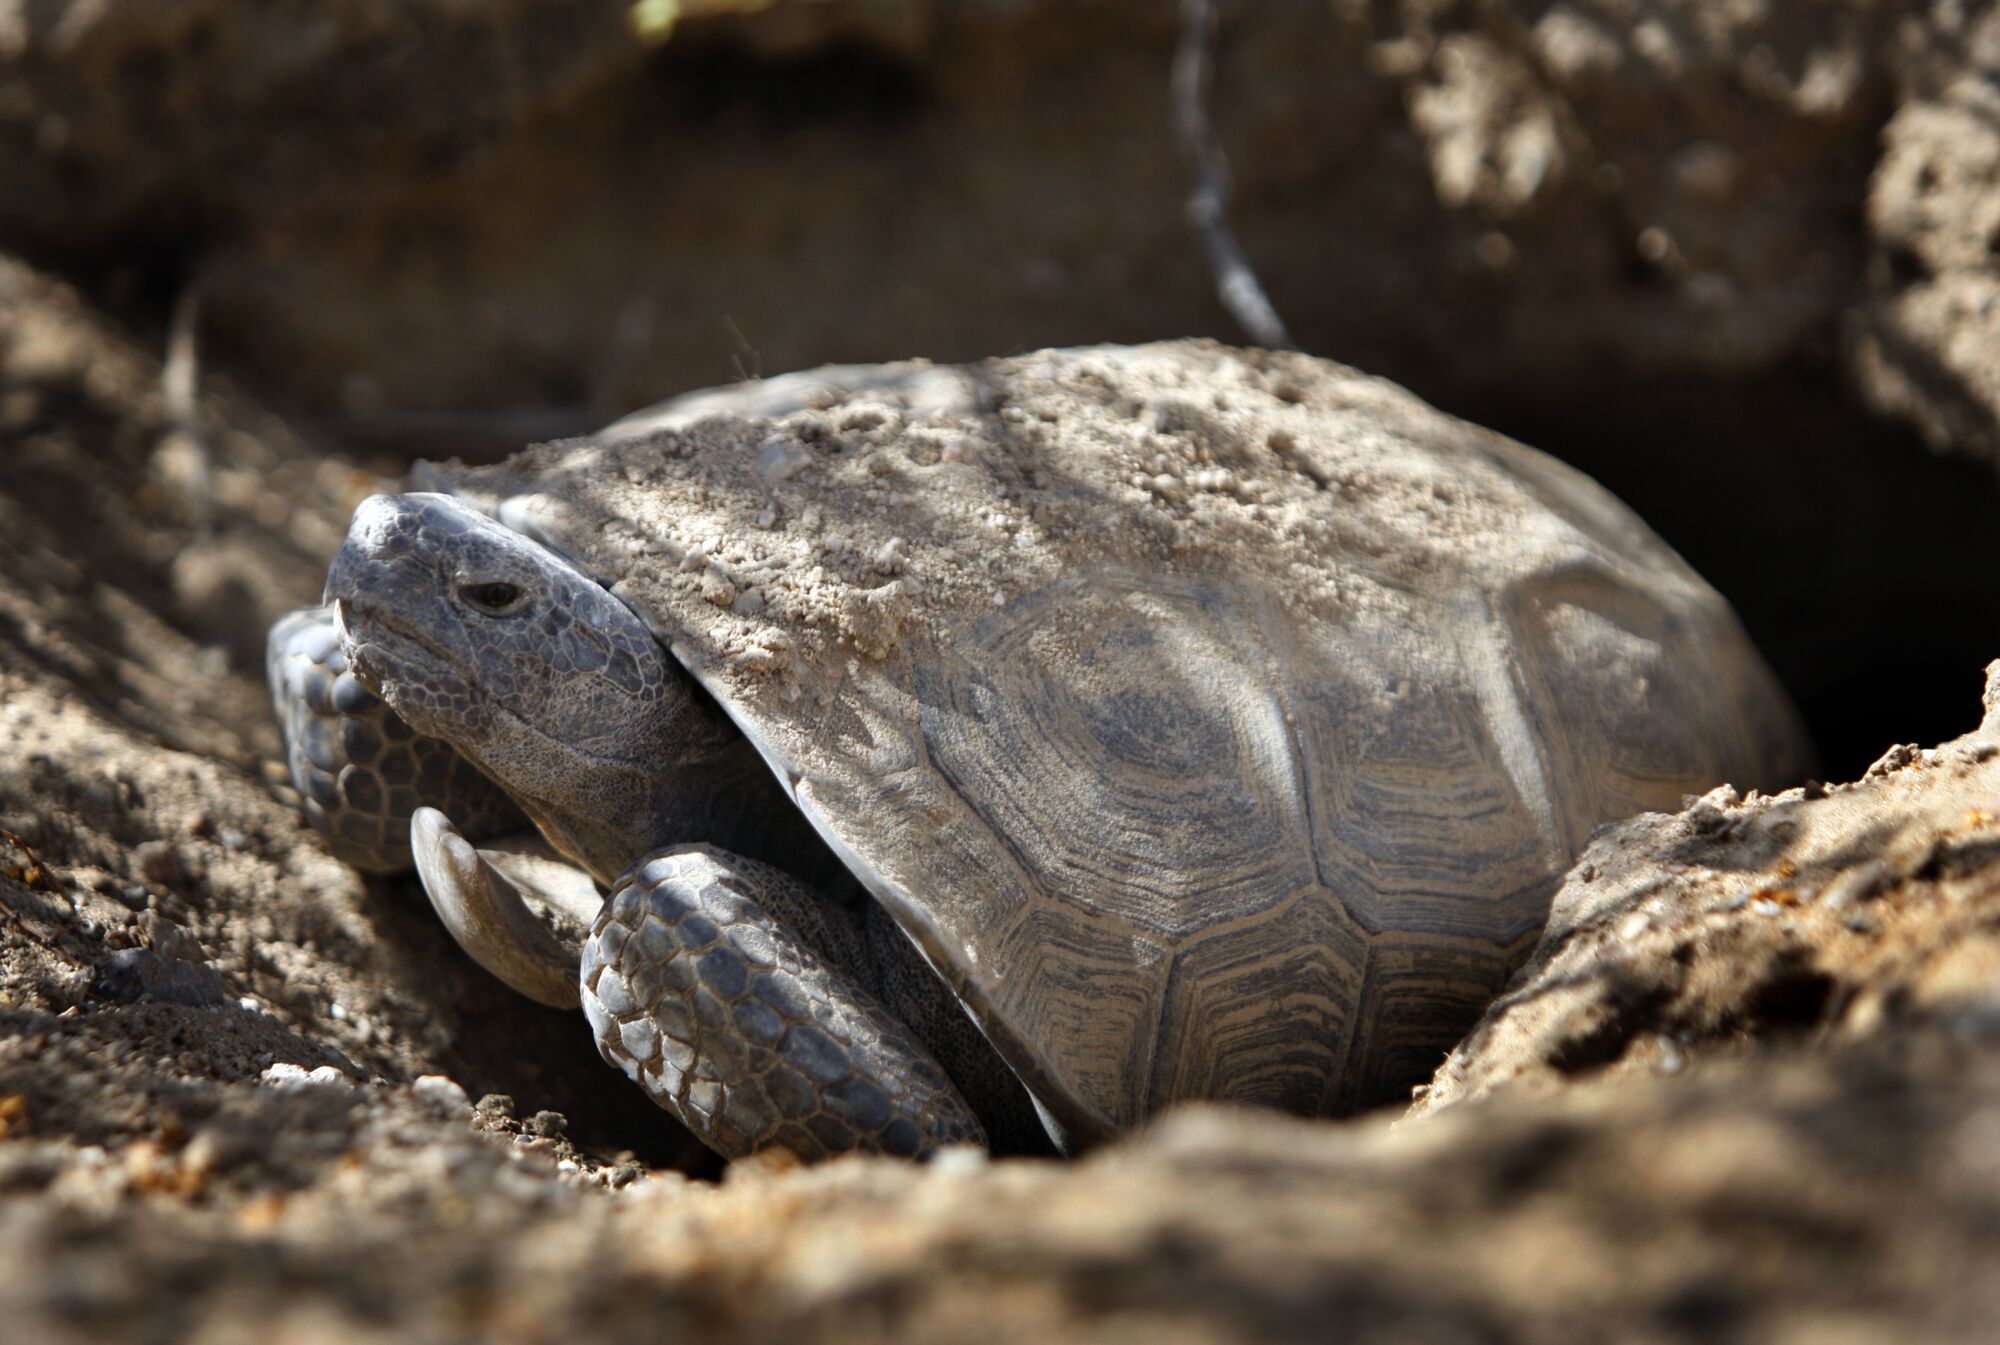 A desert tortoise looks out of its burrow in the Ivanpah Valley in the eastern Mojave Desert.